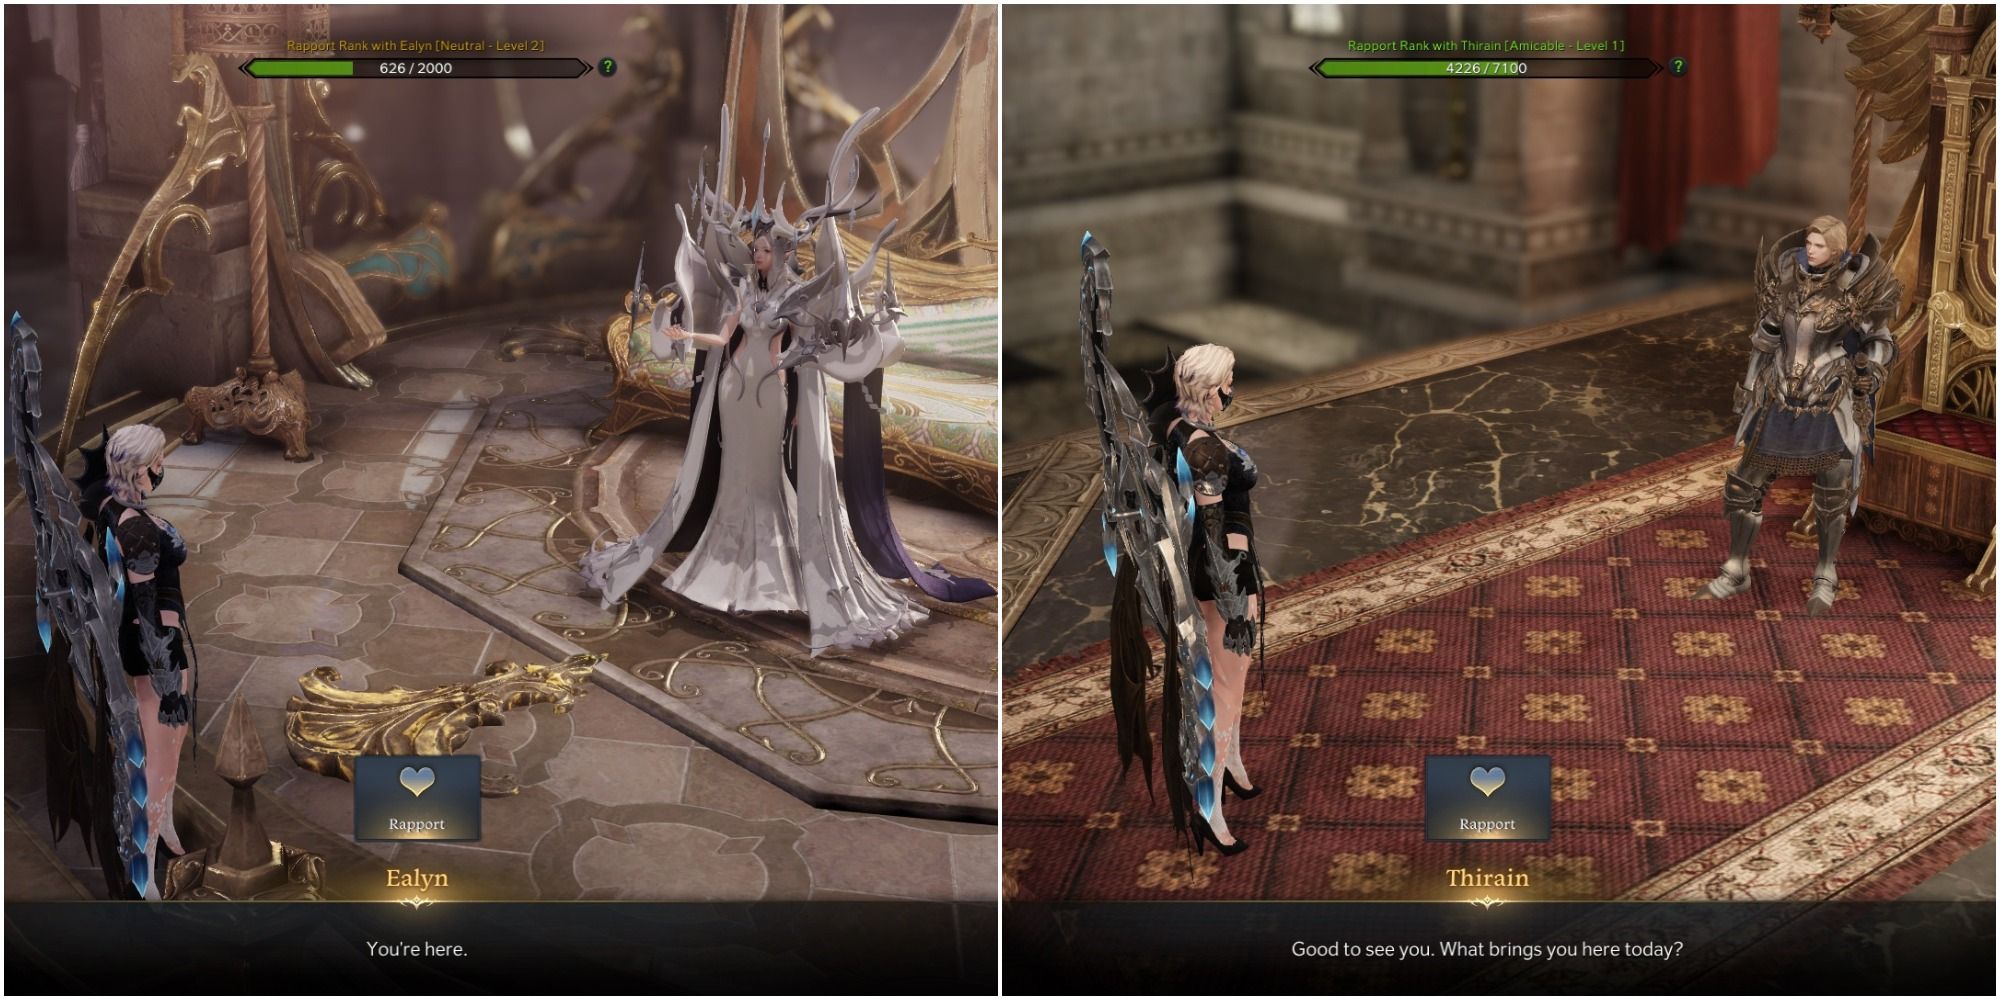 Lost Ark Split image of talking to Queen Ealyn and talking to King Thirain